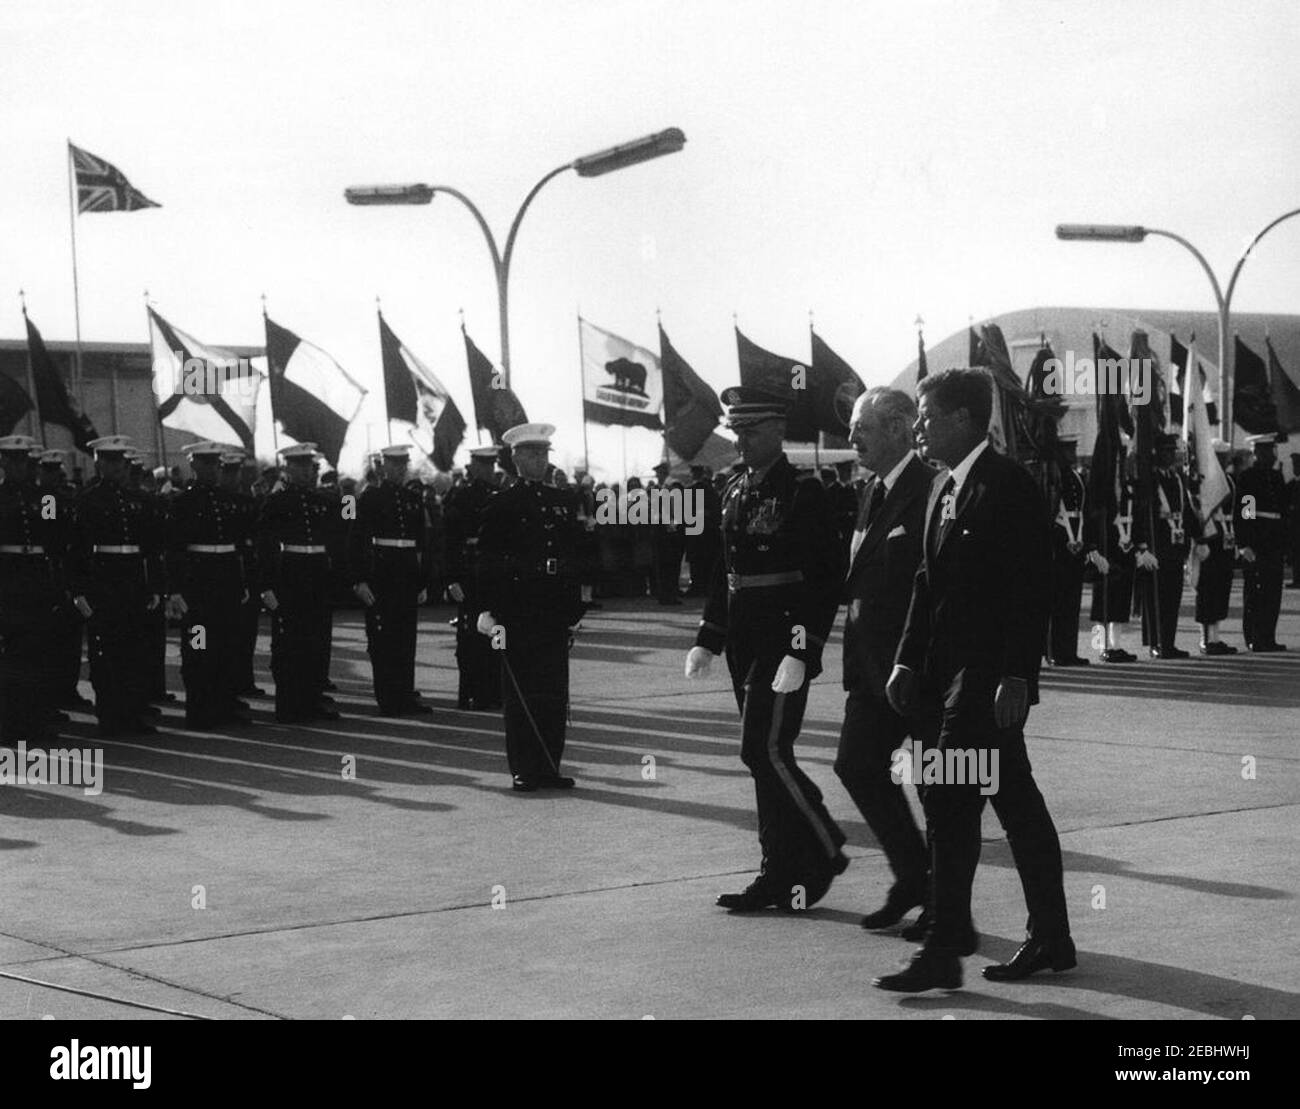 Arrival ceremonies for Harold Macmillan, Prime Minister of Great Britain, 4:50PM. Commander of Troops, Lieutenant Colonel Charles P. Murray, Jr. (center right), escorts President John F. Kennedy and Prime Minister of Great Britain, Harold Macmillan, past the United States Marine Corps Honor Guard during arrival ceremonies for Prime Minister Macmillan. Andrews Air Force Base, Maryland. Stock Photo